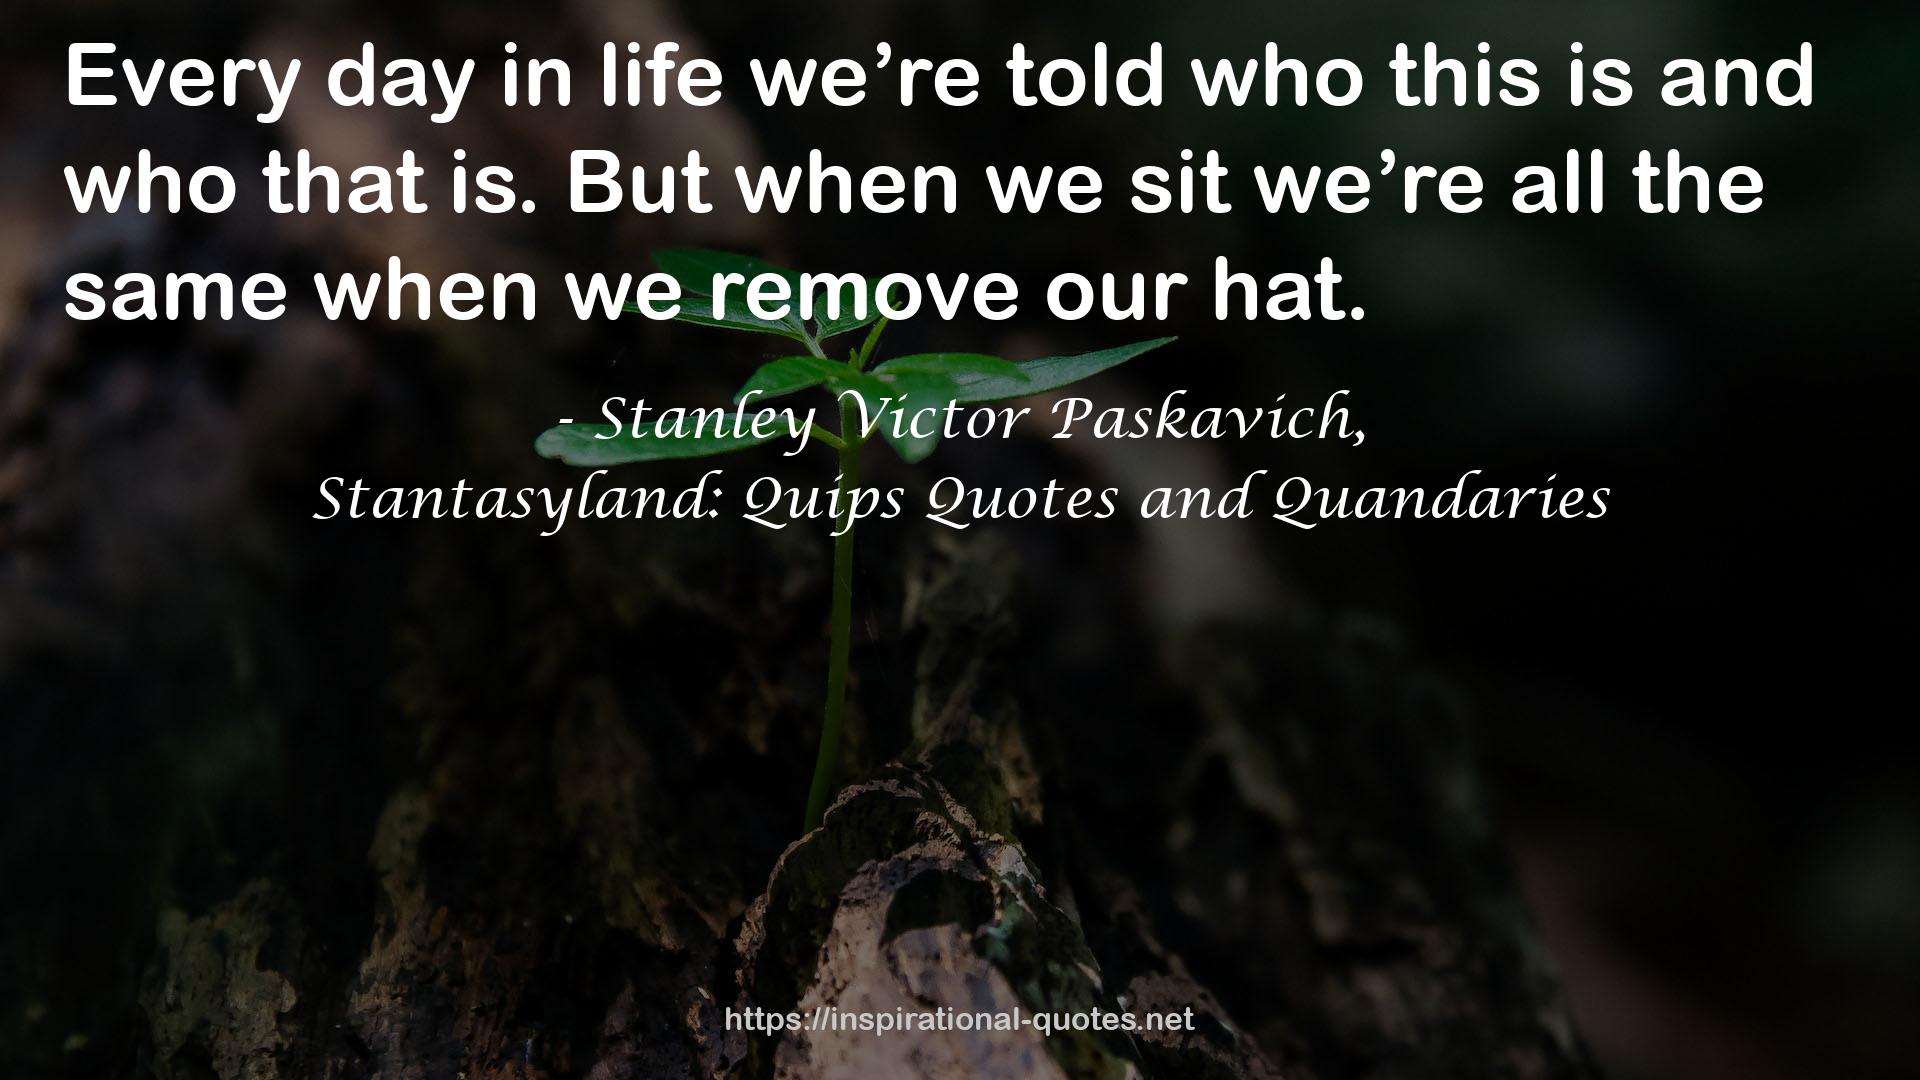 Stanley Victor Paskavich, QUOTES